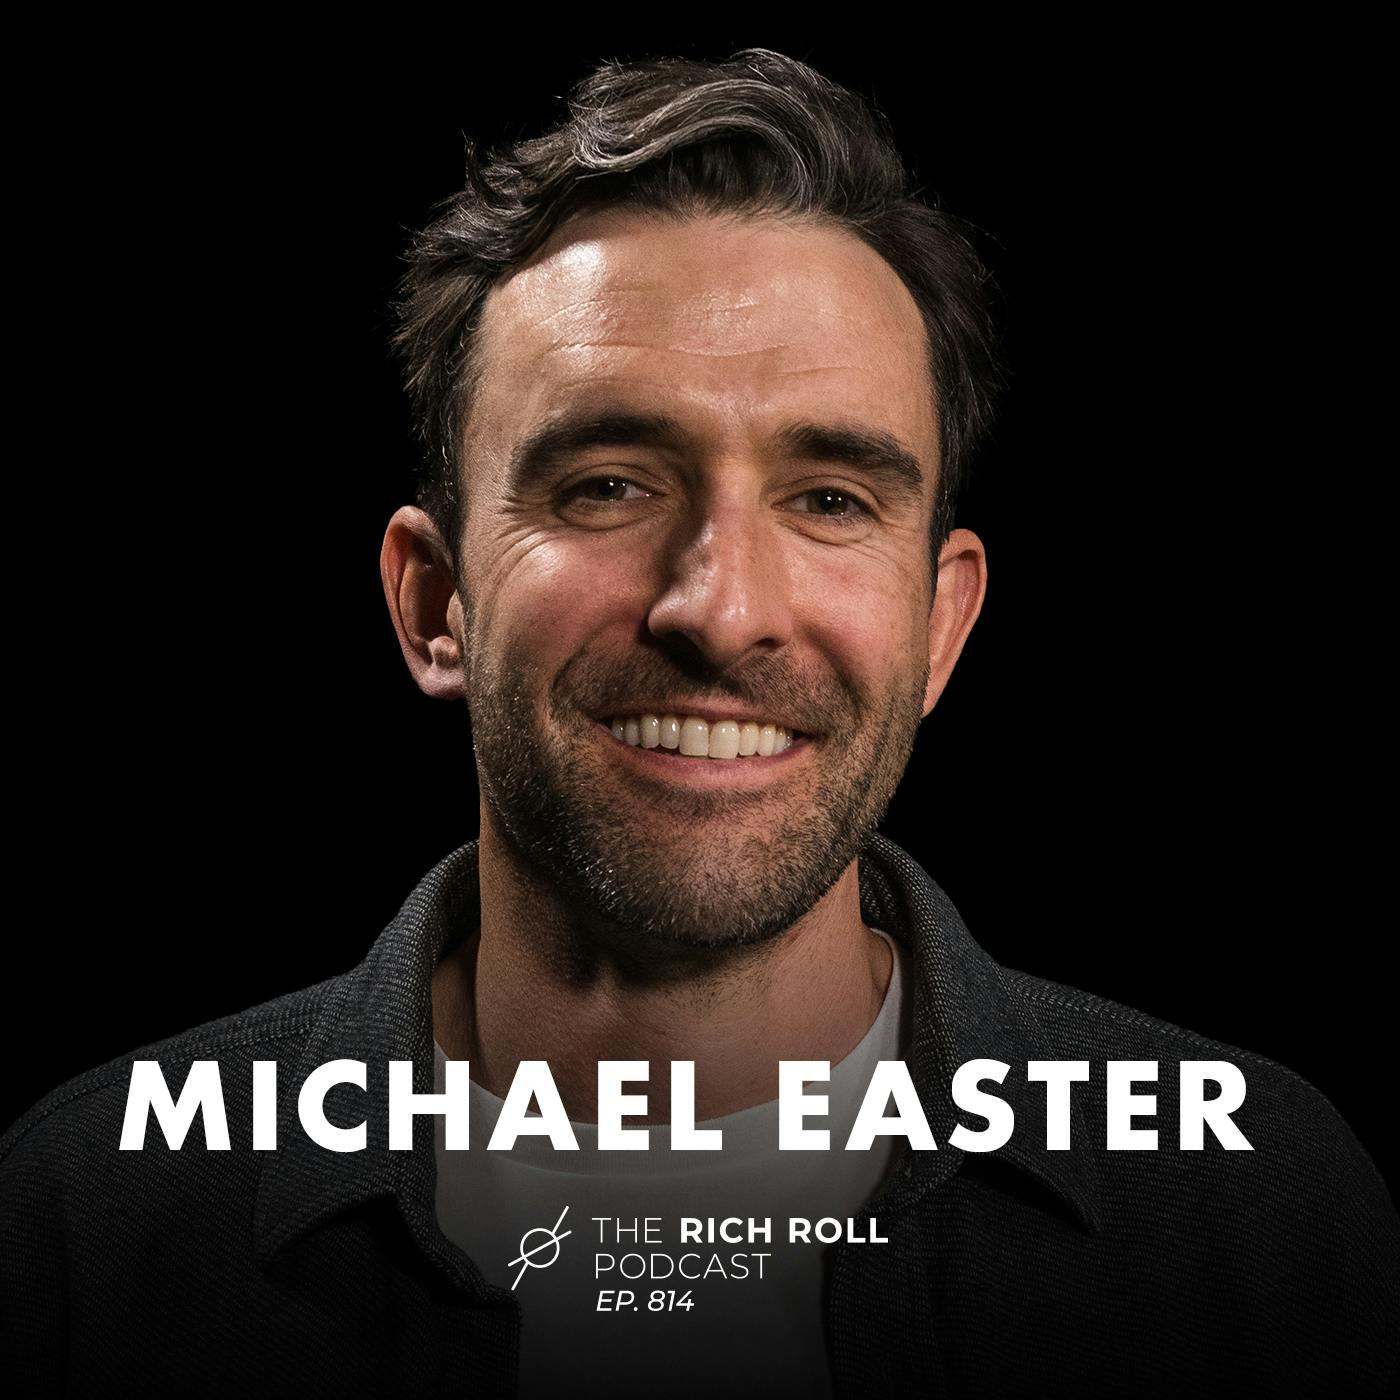 The Scarcity Brain: Michael Easter On How To Rewire Your Habits to Thrive with Enough